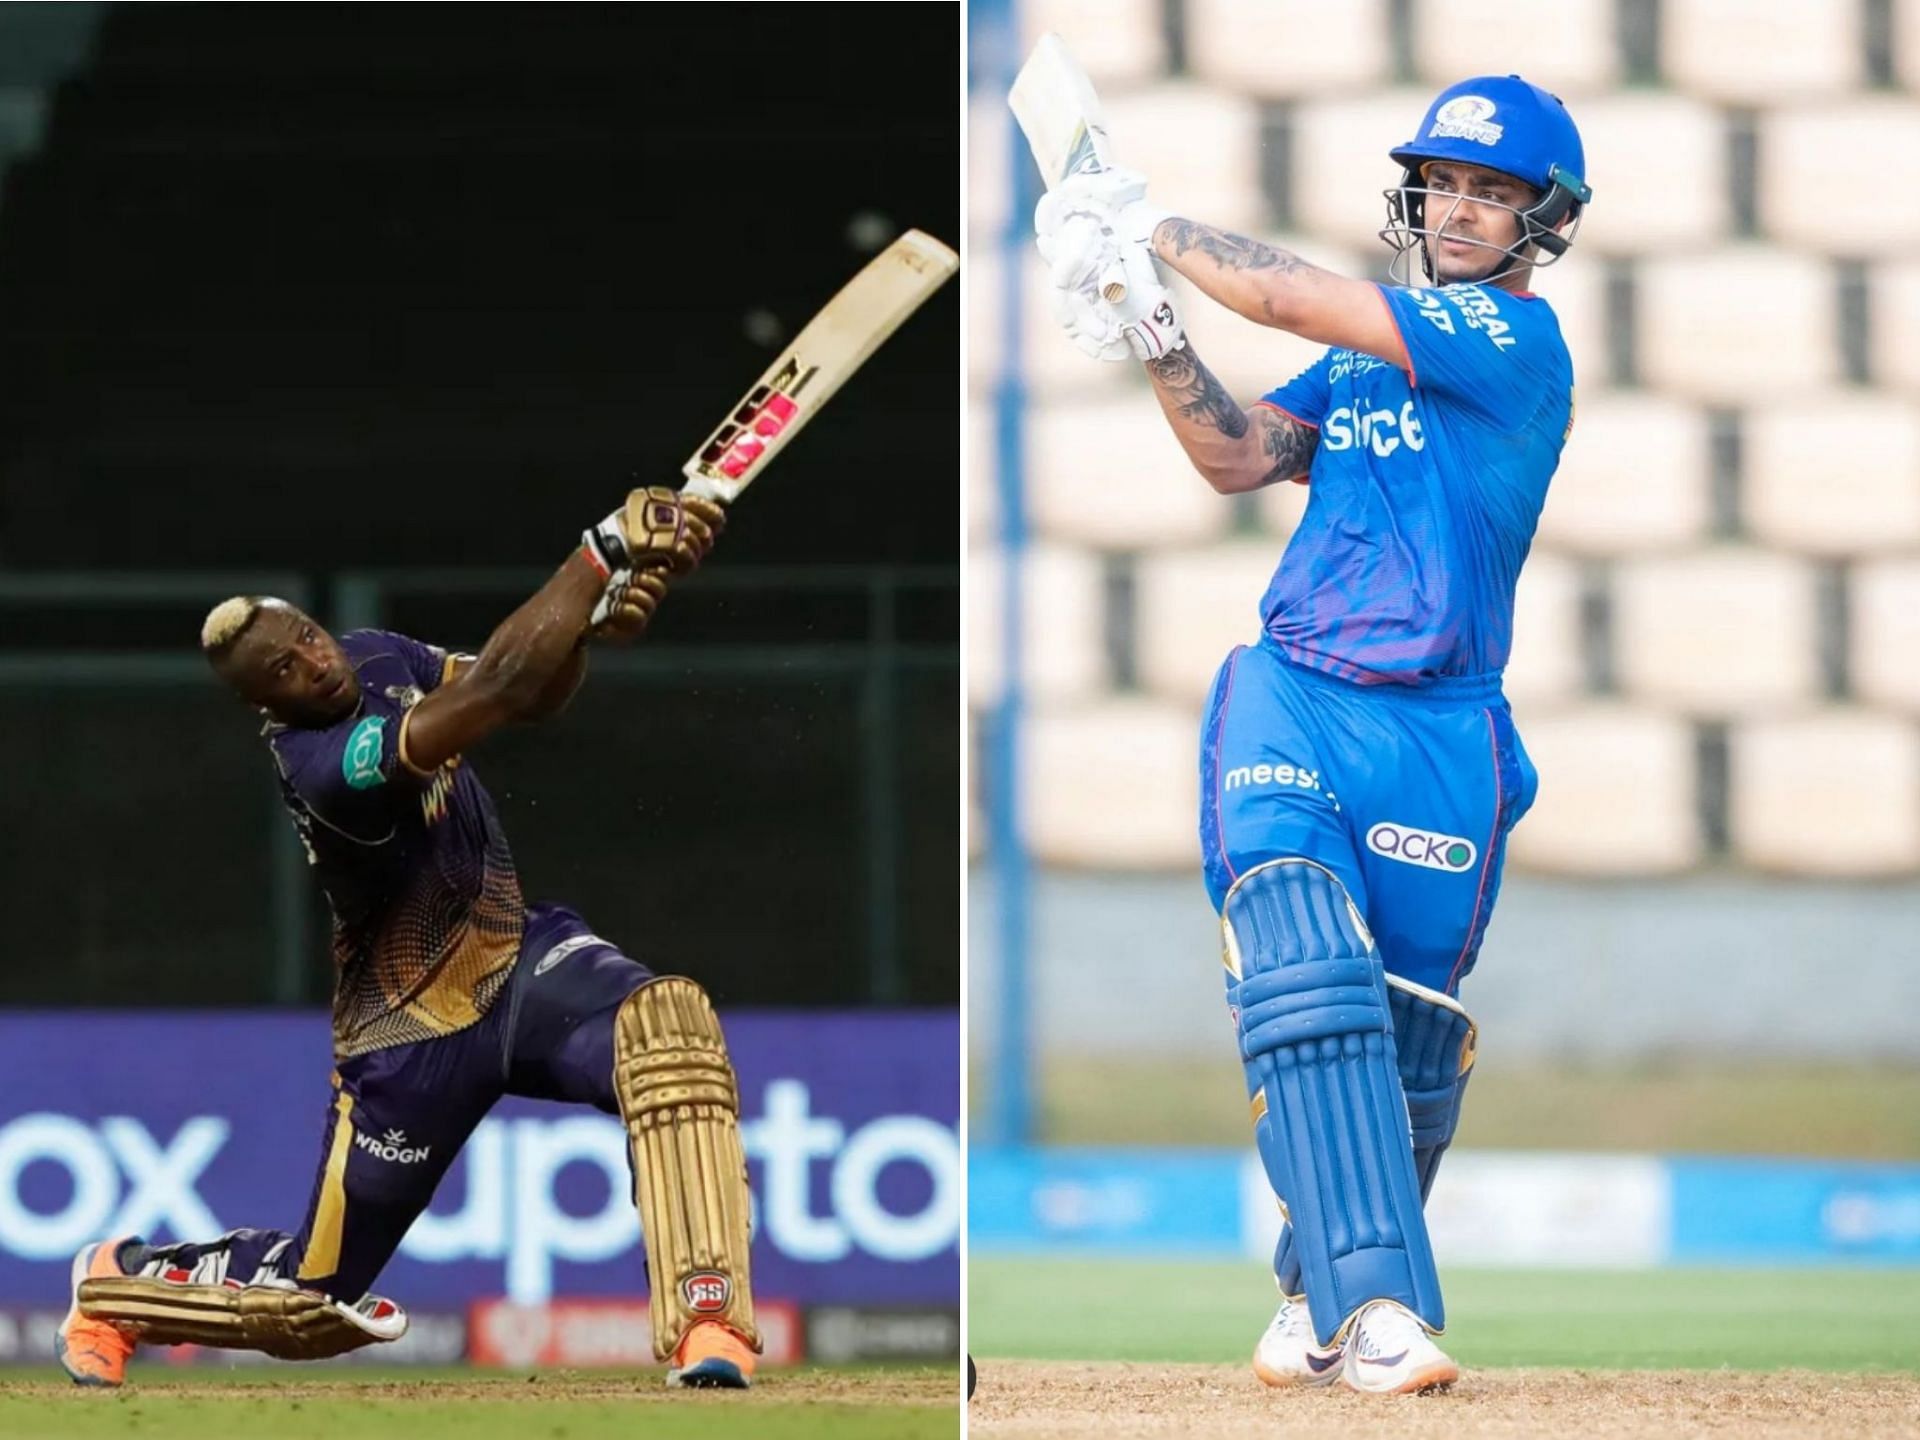 Andre Russell (L) and Ishan Kishan (R) during Week 1 of the IPL 2022